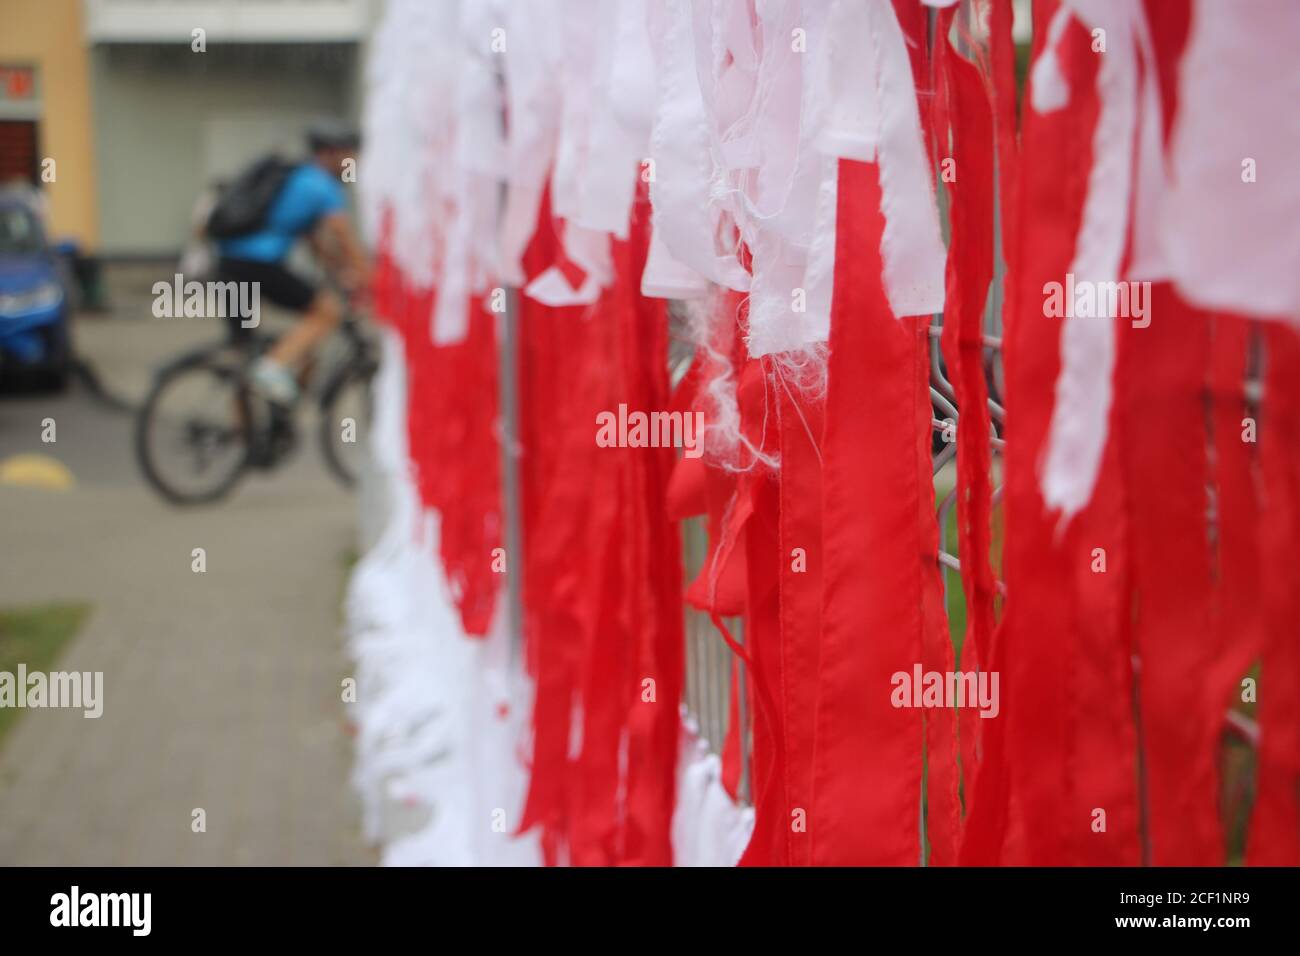 Belarus national flag made of ribbons on fence. Symbol of hope and freedom. Peaceful protest after president elections 2020. Stock Photo